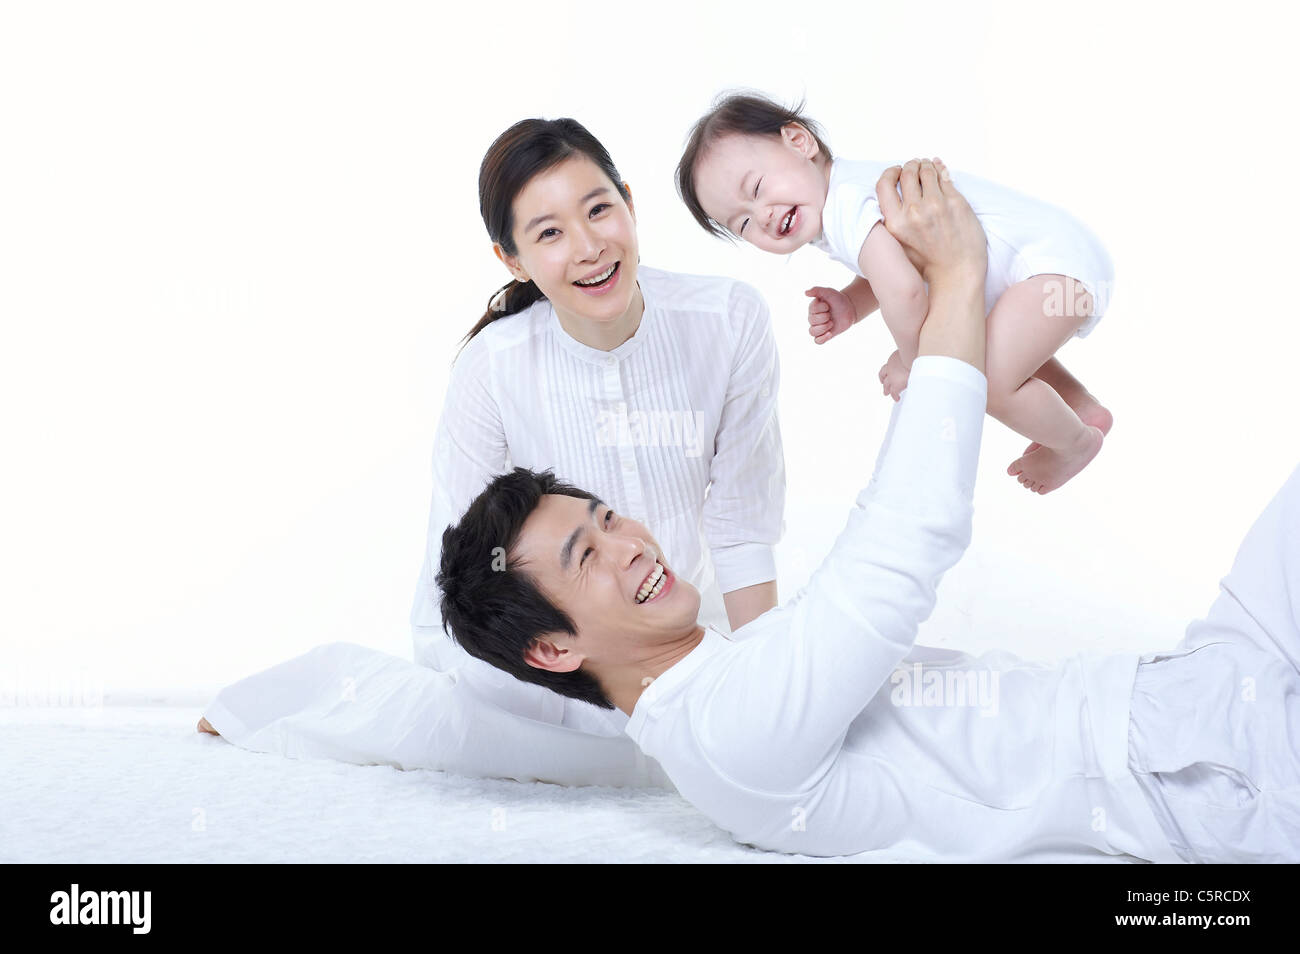 A family having a good time with their baby Stock Photo